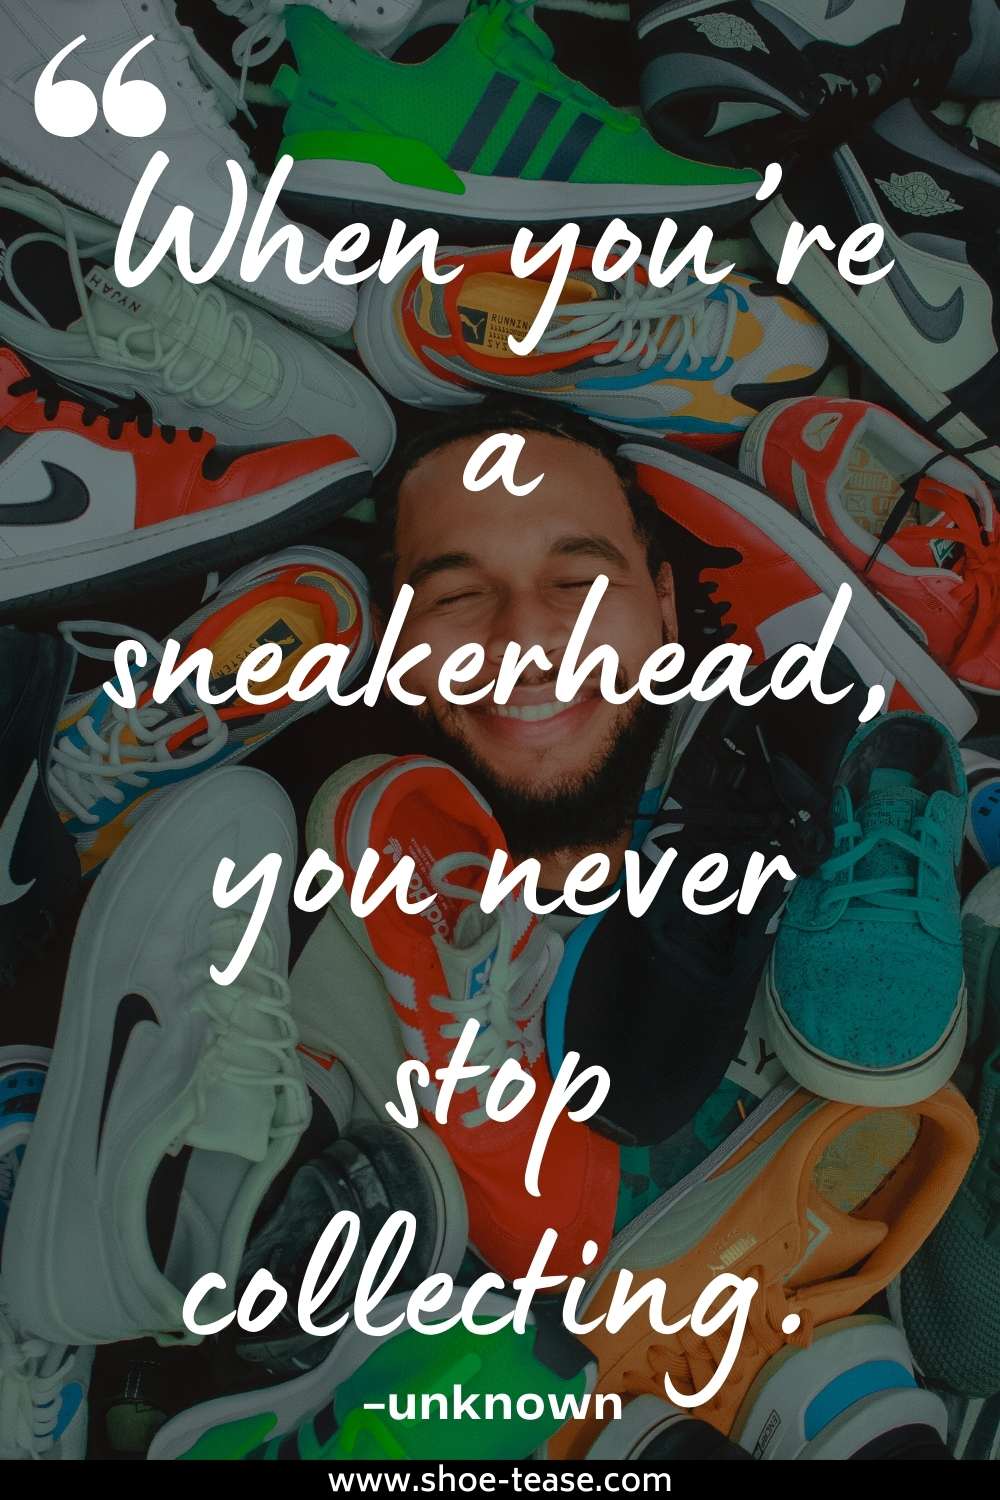 Sneakers Quote reading When you're a sneakerhead, you never stop collecting over image of man in pile of shoes.